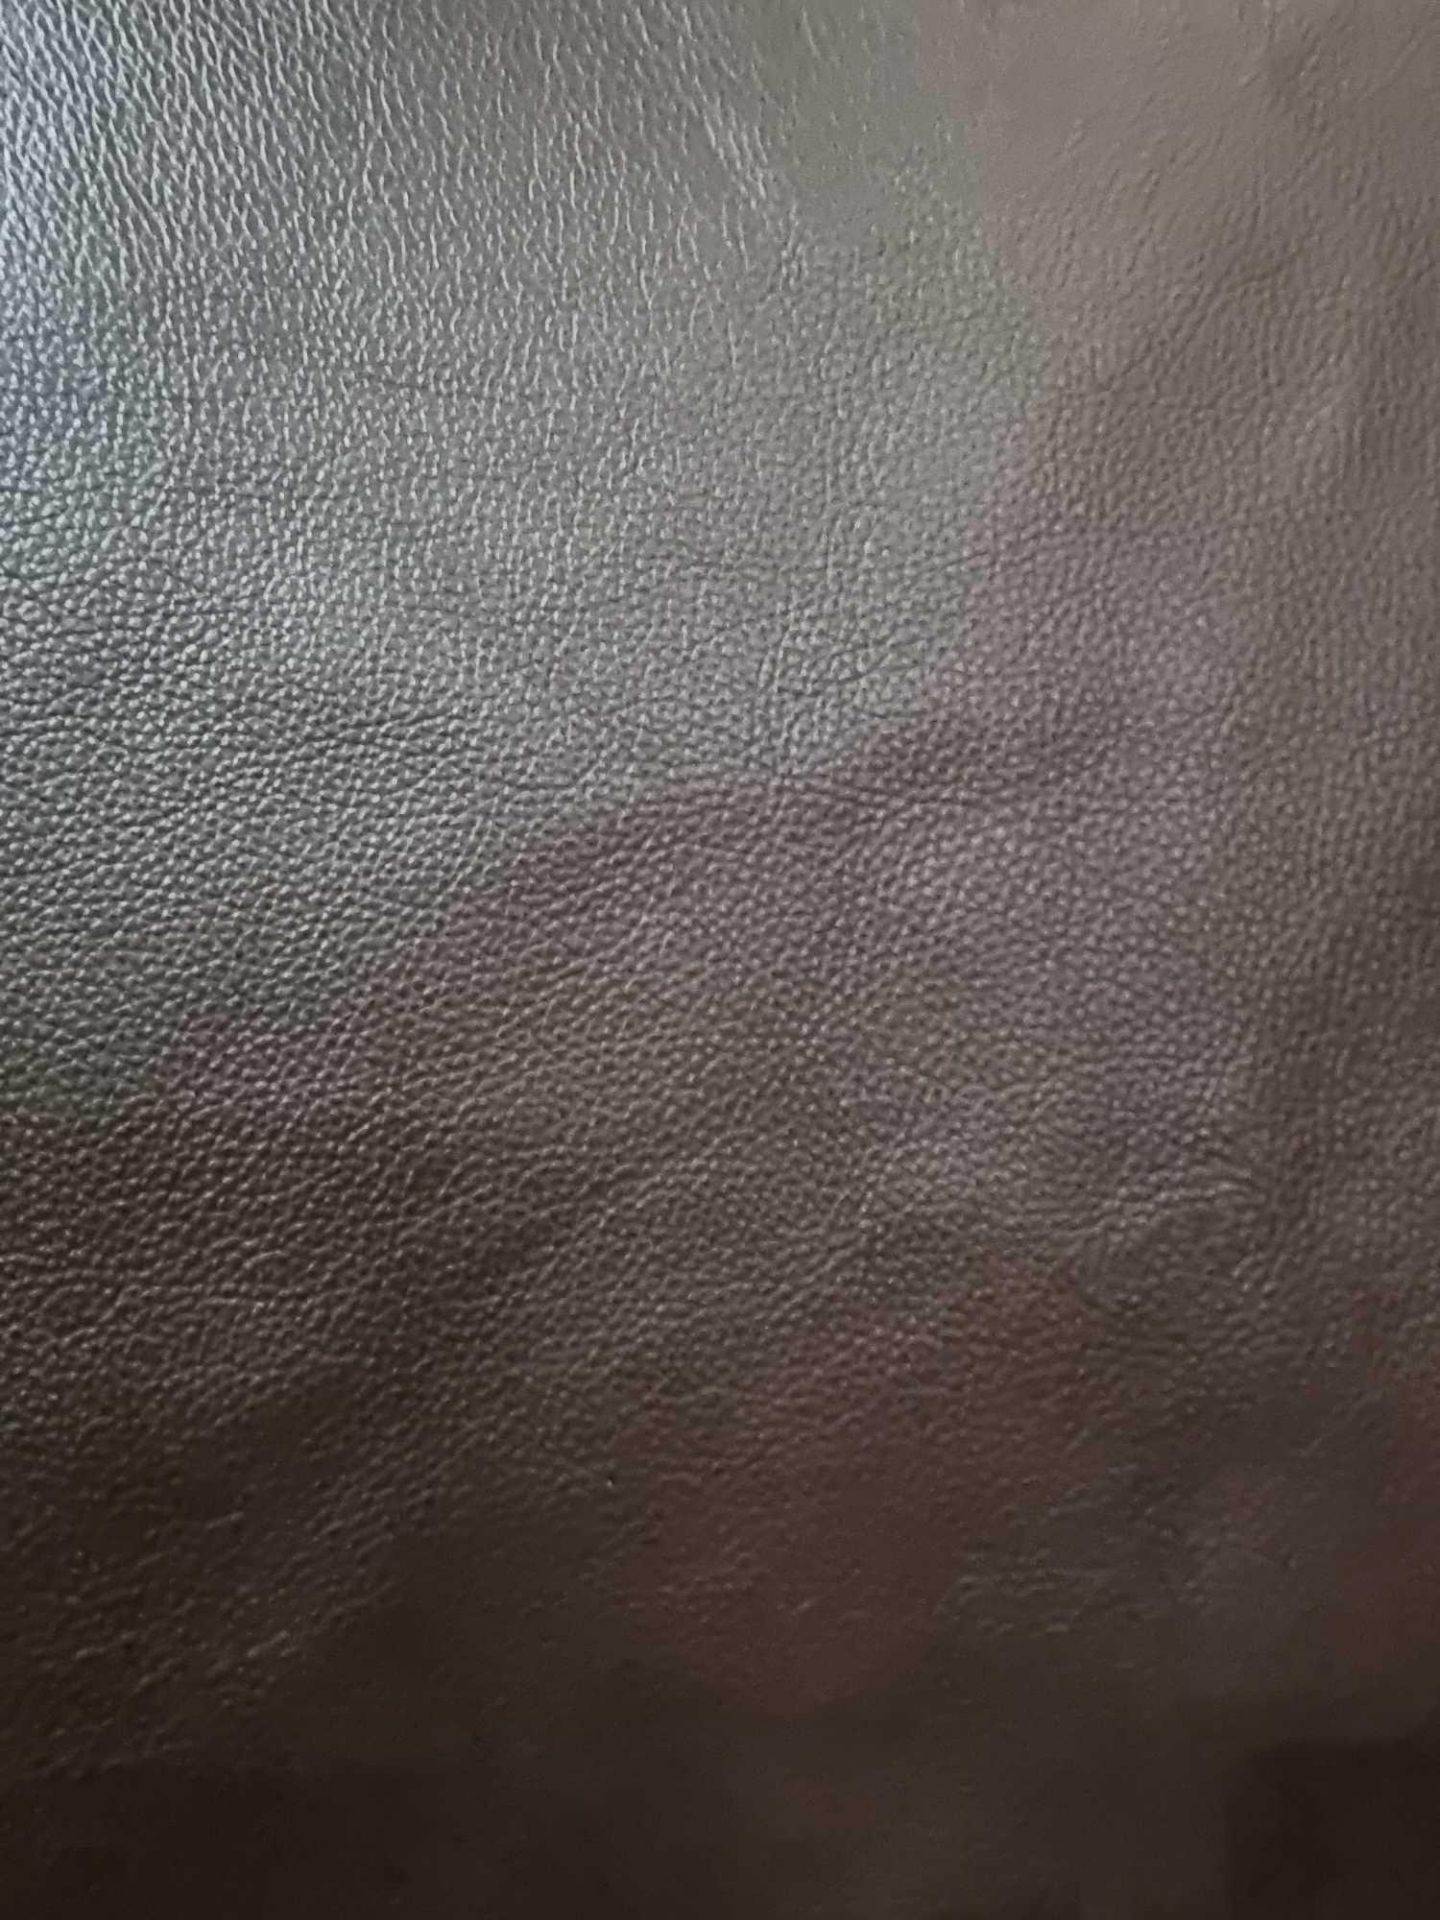 Mastrotto Hudson Chocolate Leather Hide approximately 3 4M2 2 x 1 7cm ( Hide No,242) - Image 2 of 2